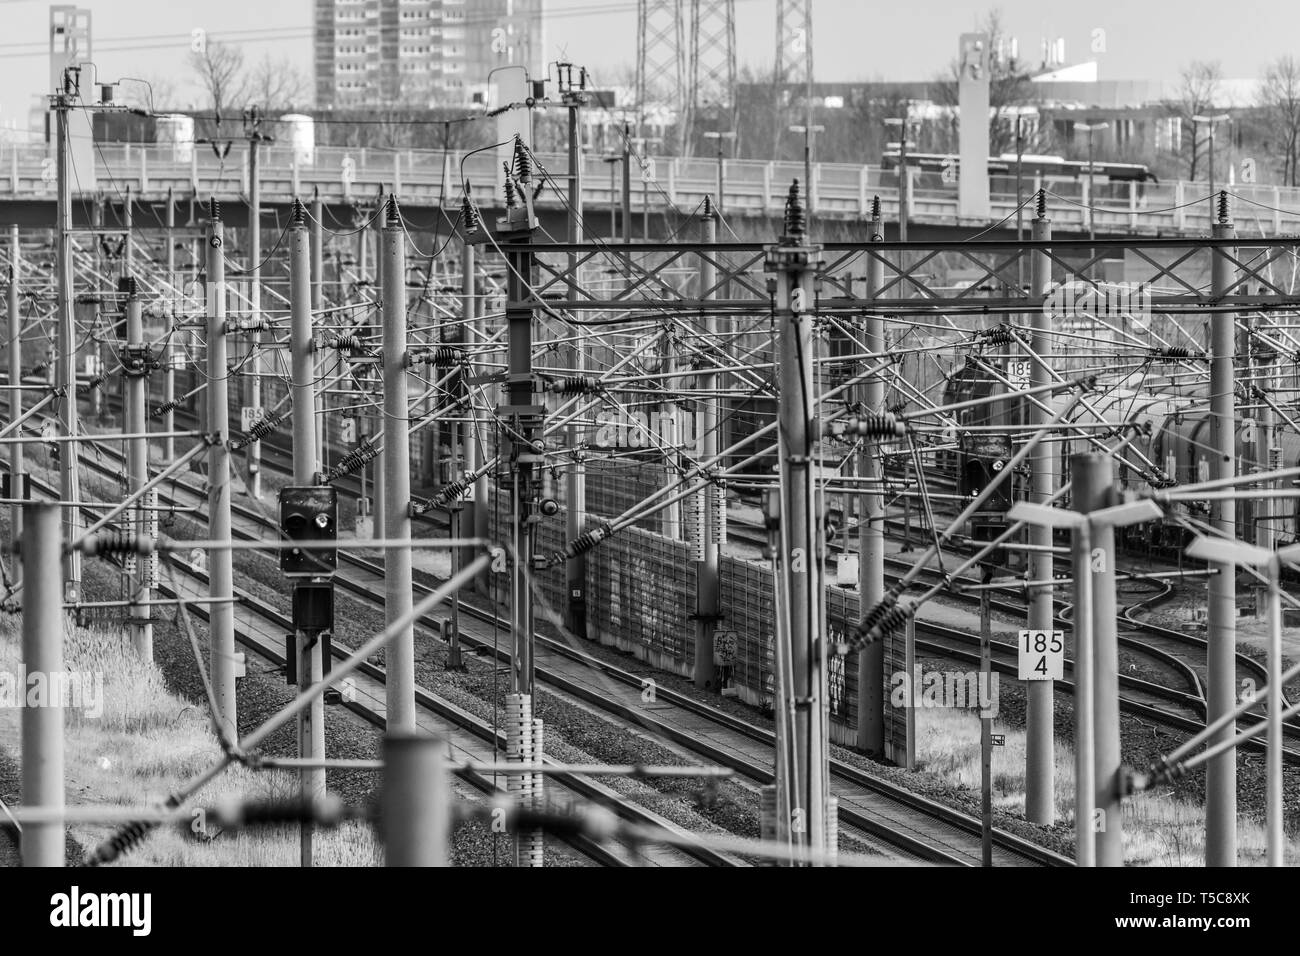 Wolfsburg, Germany, March 5., 2019: Surrealistic black and white image of power lines, rails, current collectors and track systems at a marshalling ya Stock Photo